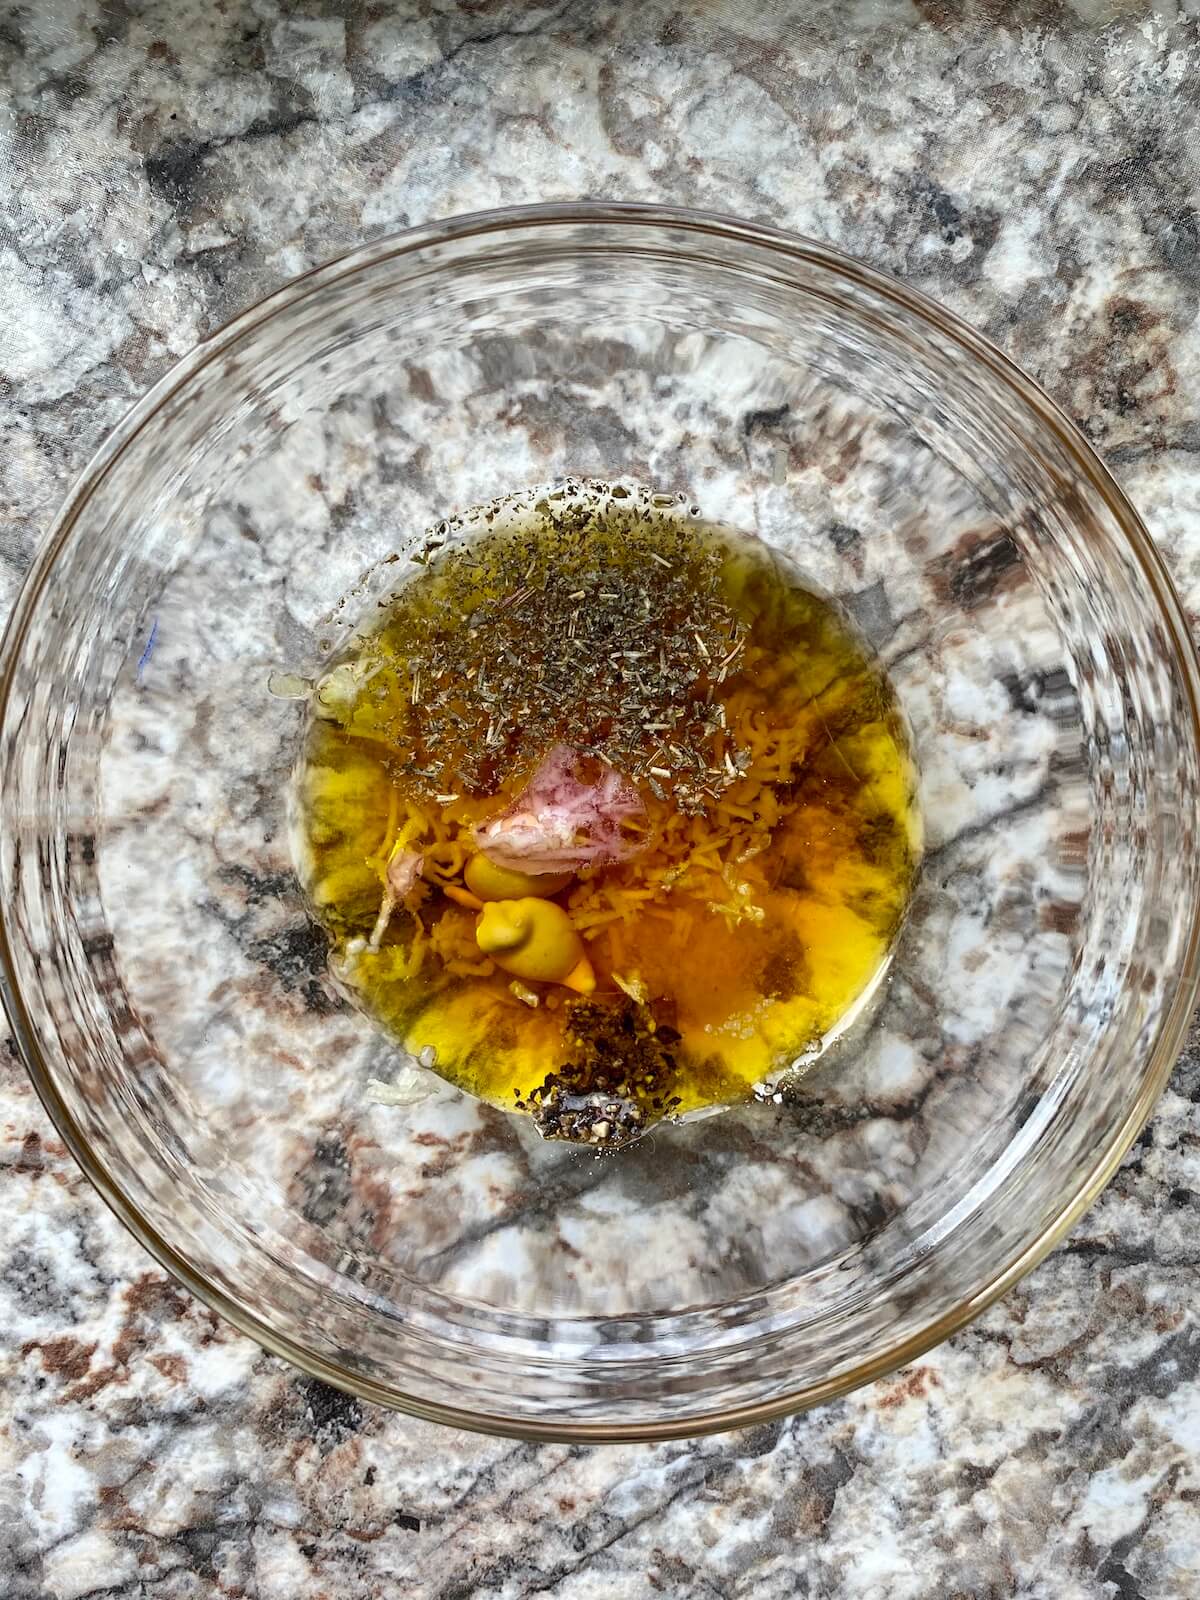 A small glass bowl with the ingredients to make red wine vinaigrette dressing.